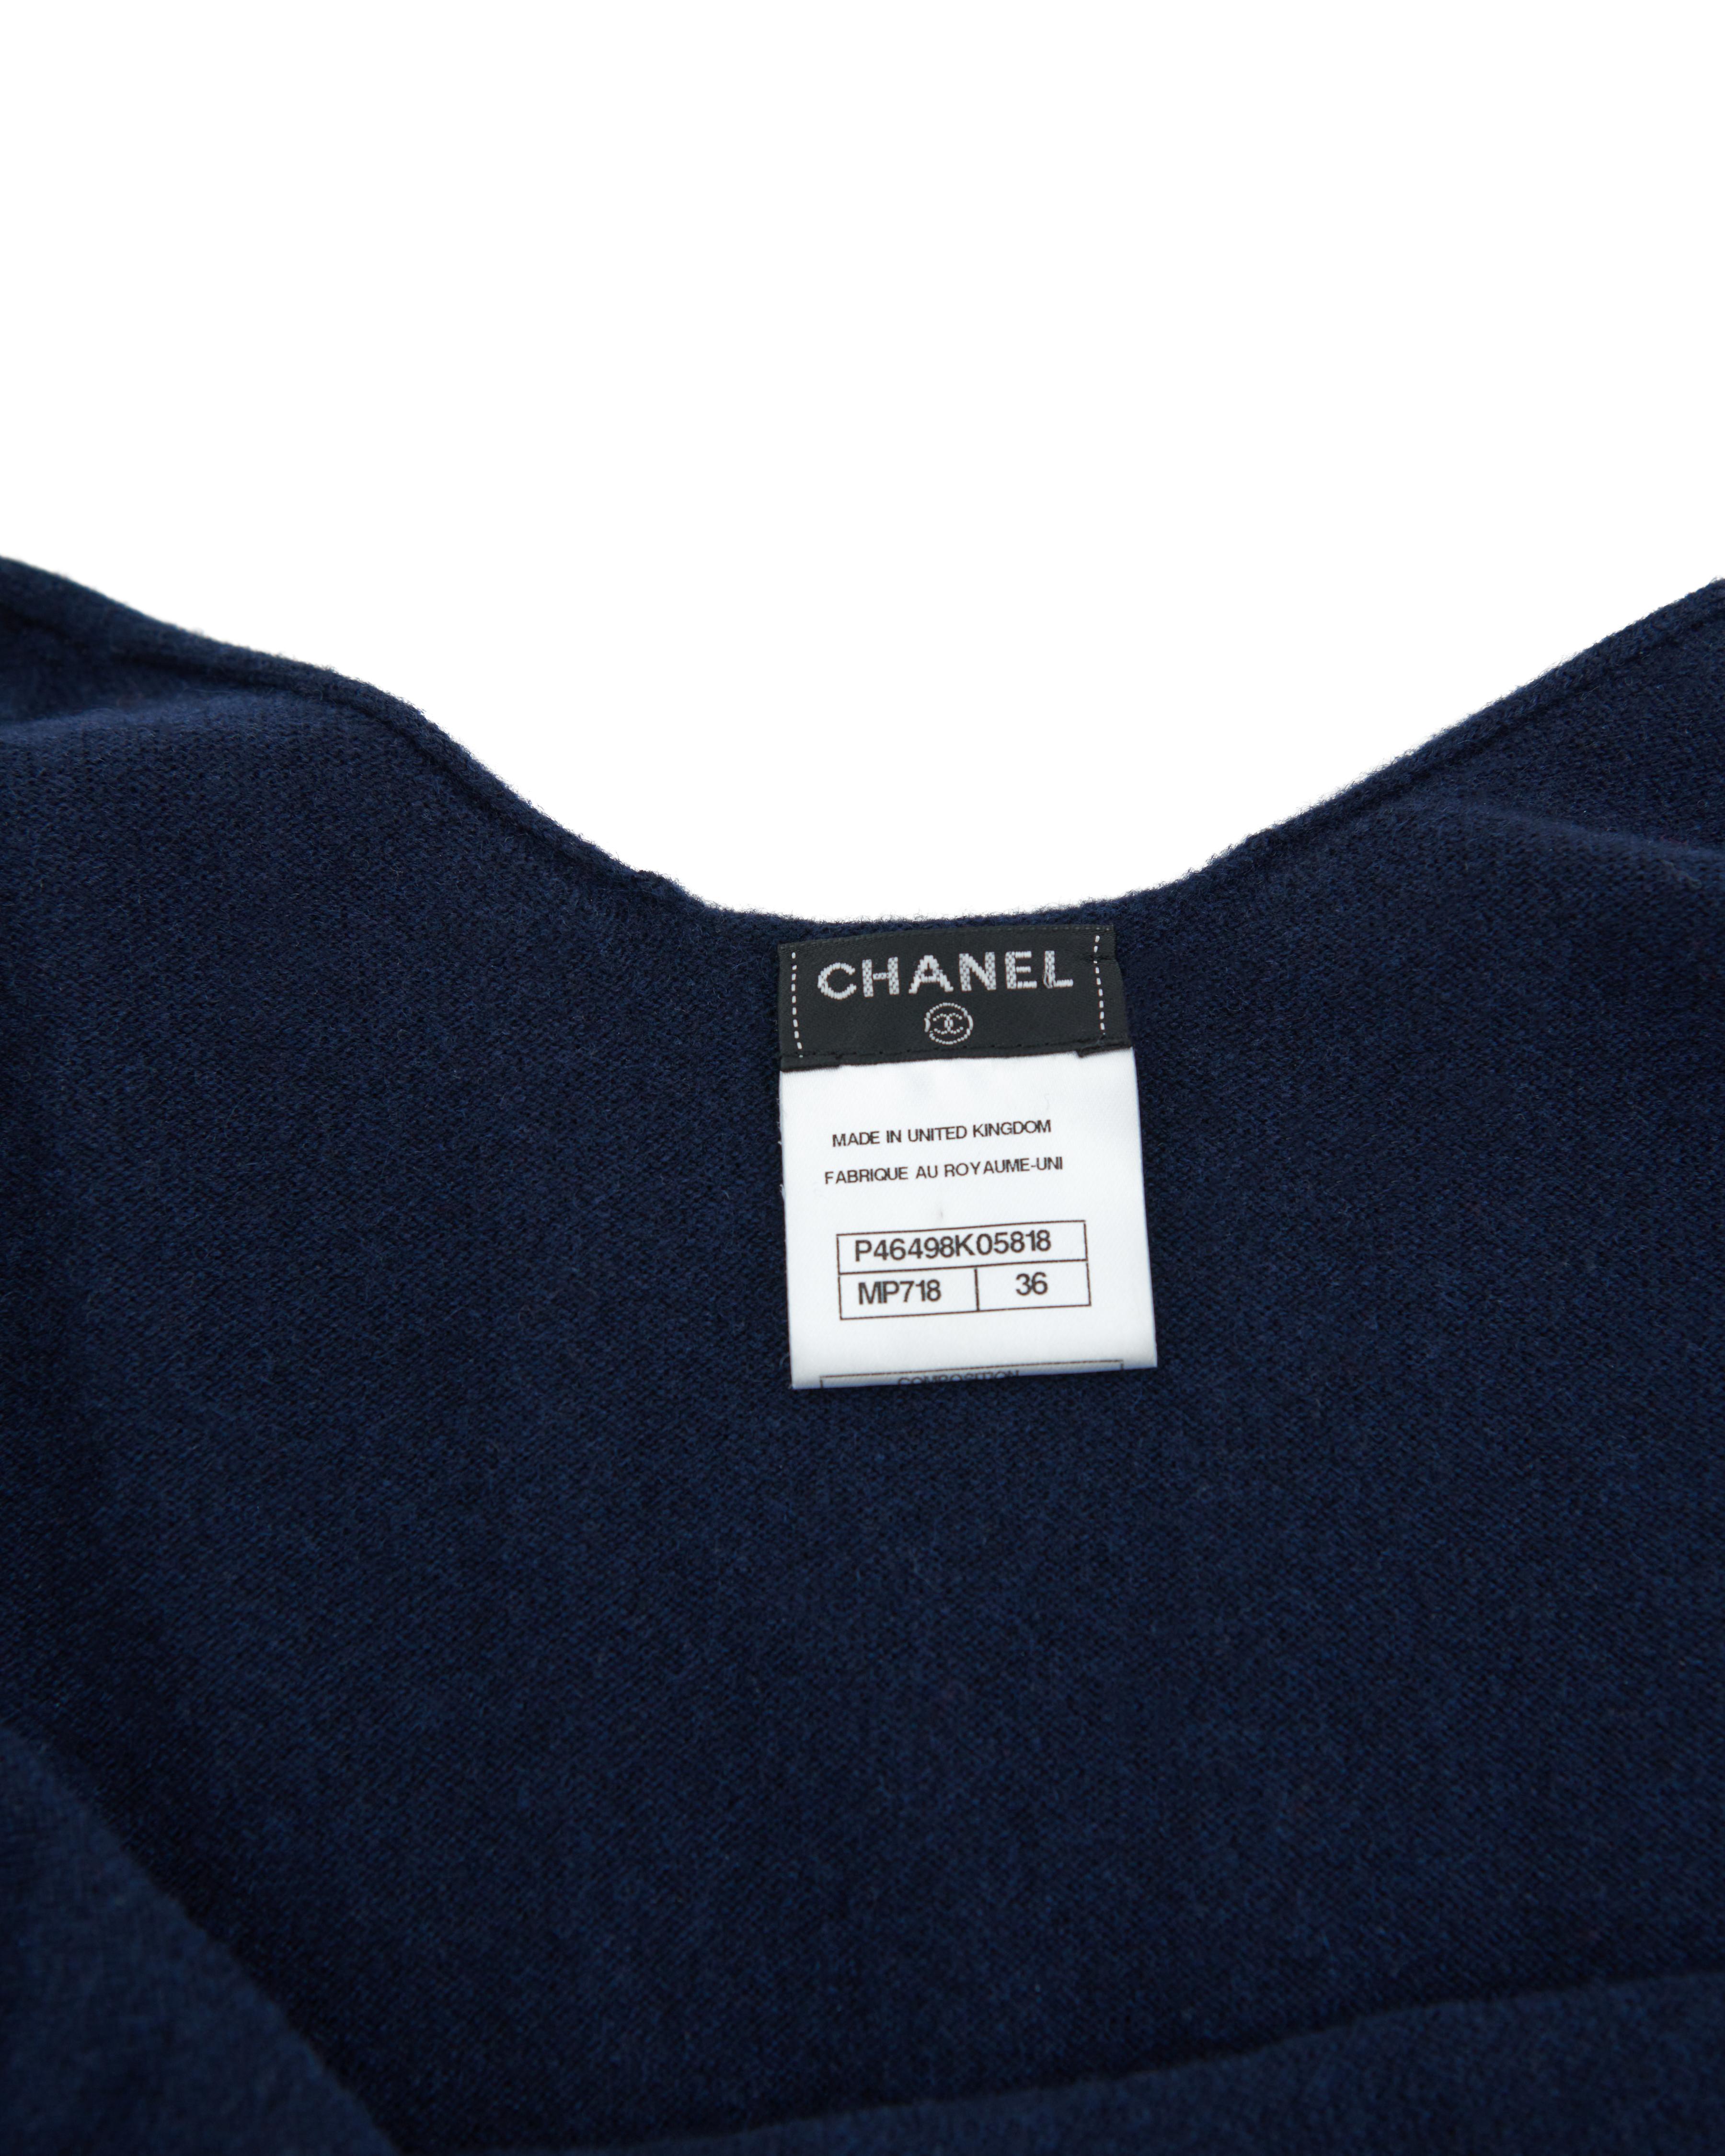 Chanel Pre-Fall 2013 Navy and multicolor cashmere argyle dress  For Sale 2